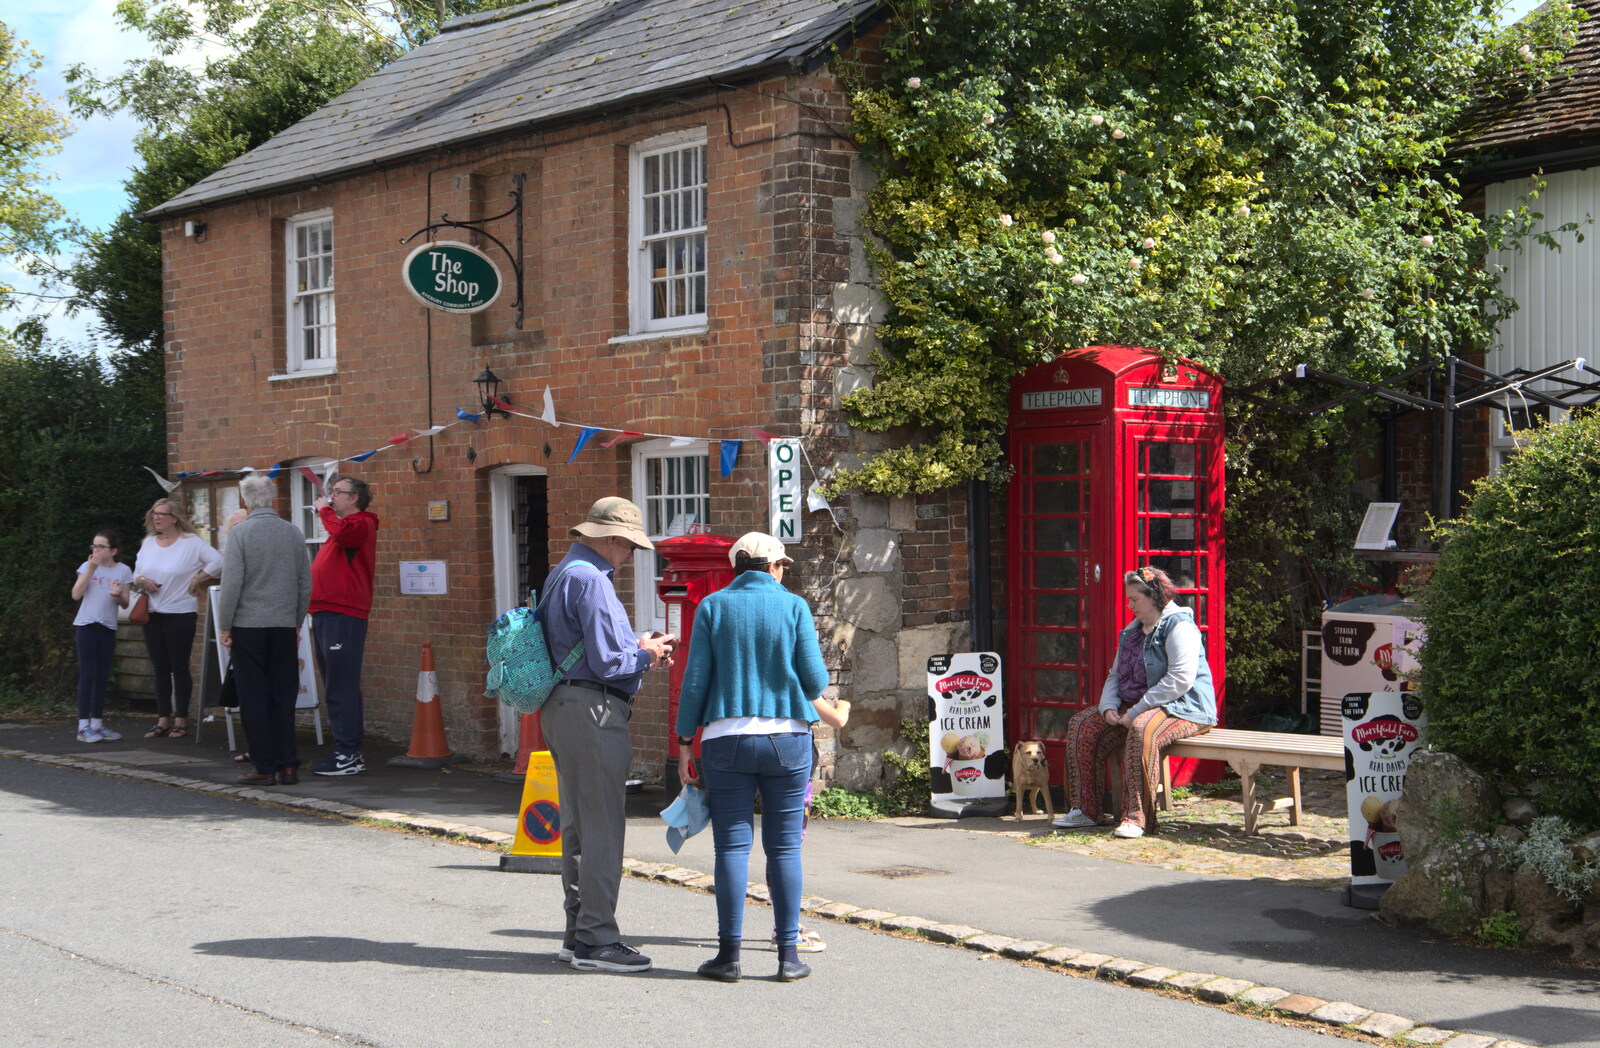 A red K6 phonebox by The Shop from Stone Circles: Stonehenge and Avebury, Wiltshire - 22nd August 2020